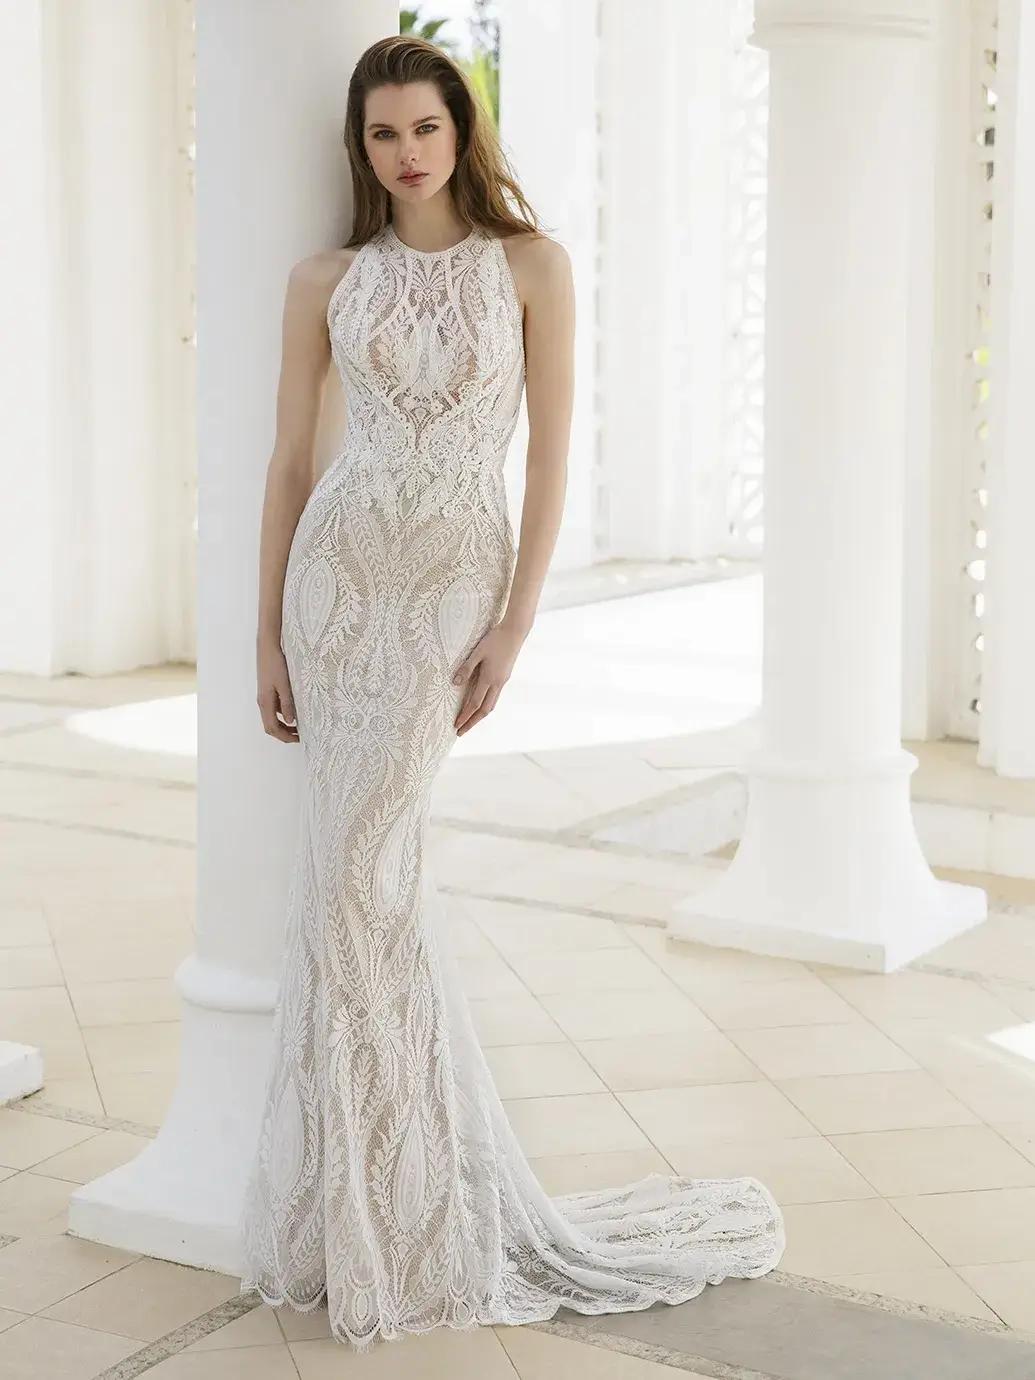 2024 Vision: The Hottest Trends in Bridal Gowns for the New Year. Mobile Image